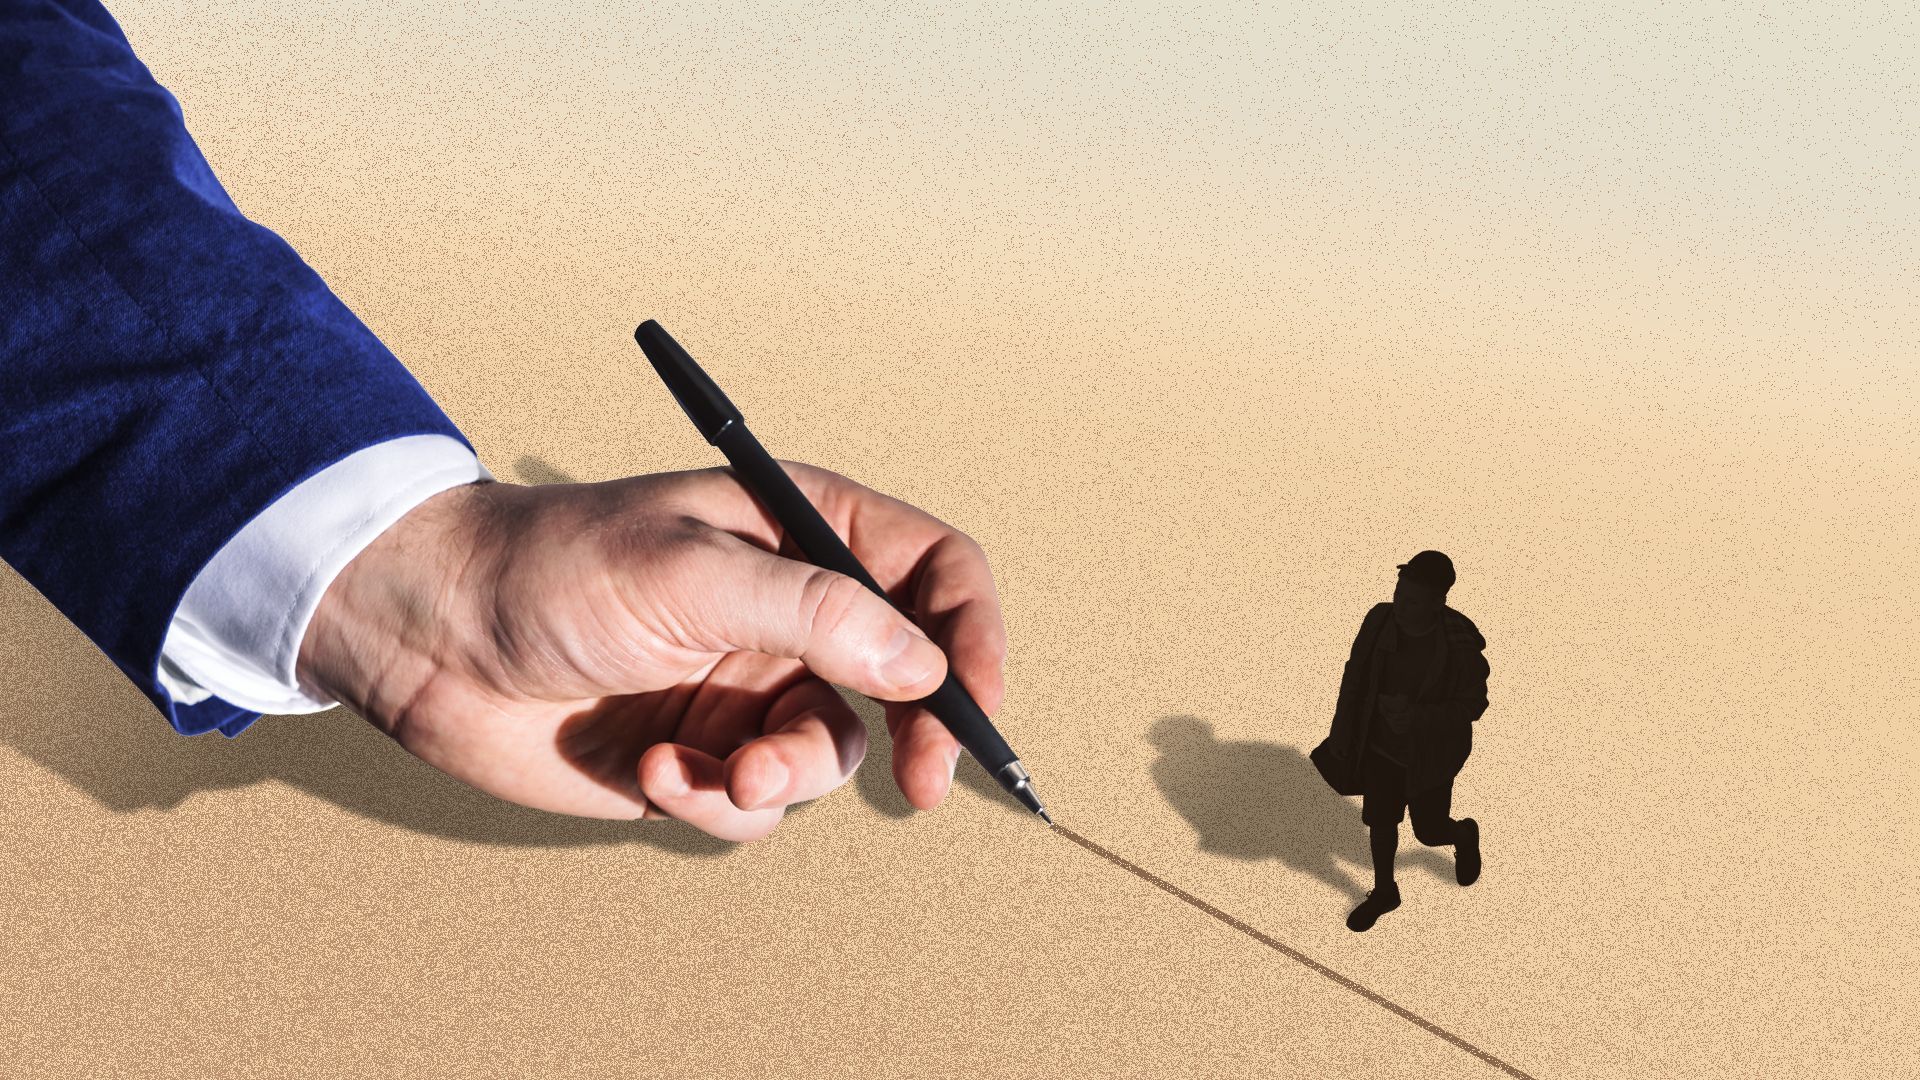 Illustration of a hand in a suit with pen drawing a line on the ground in front of small person walking